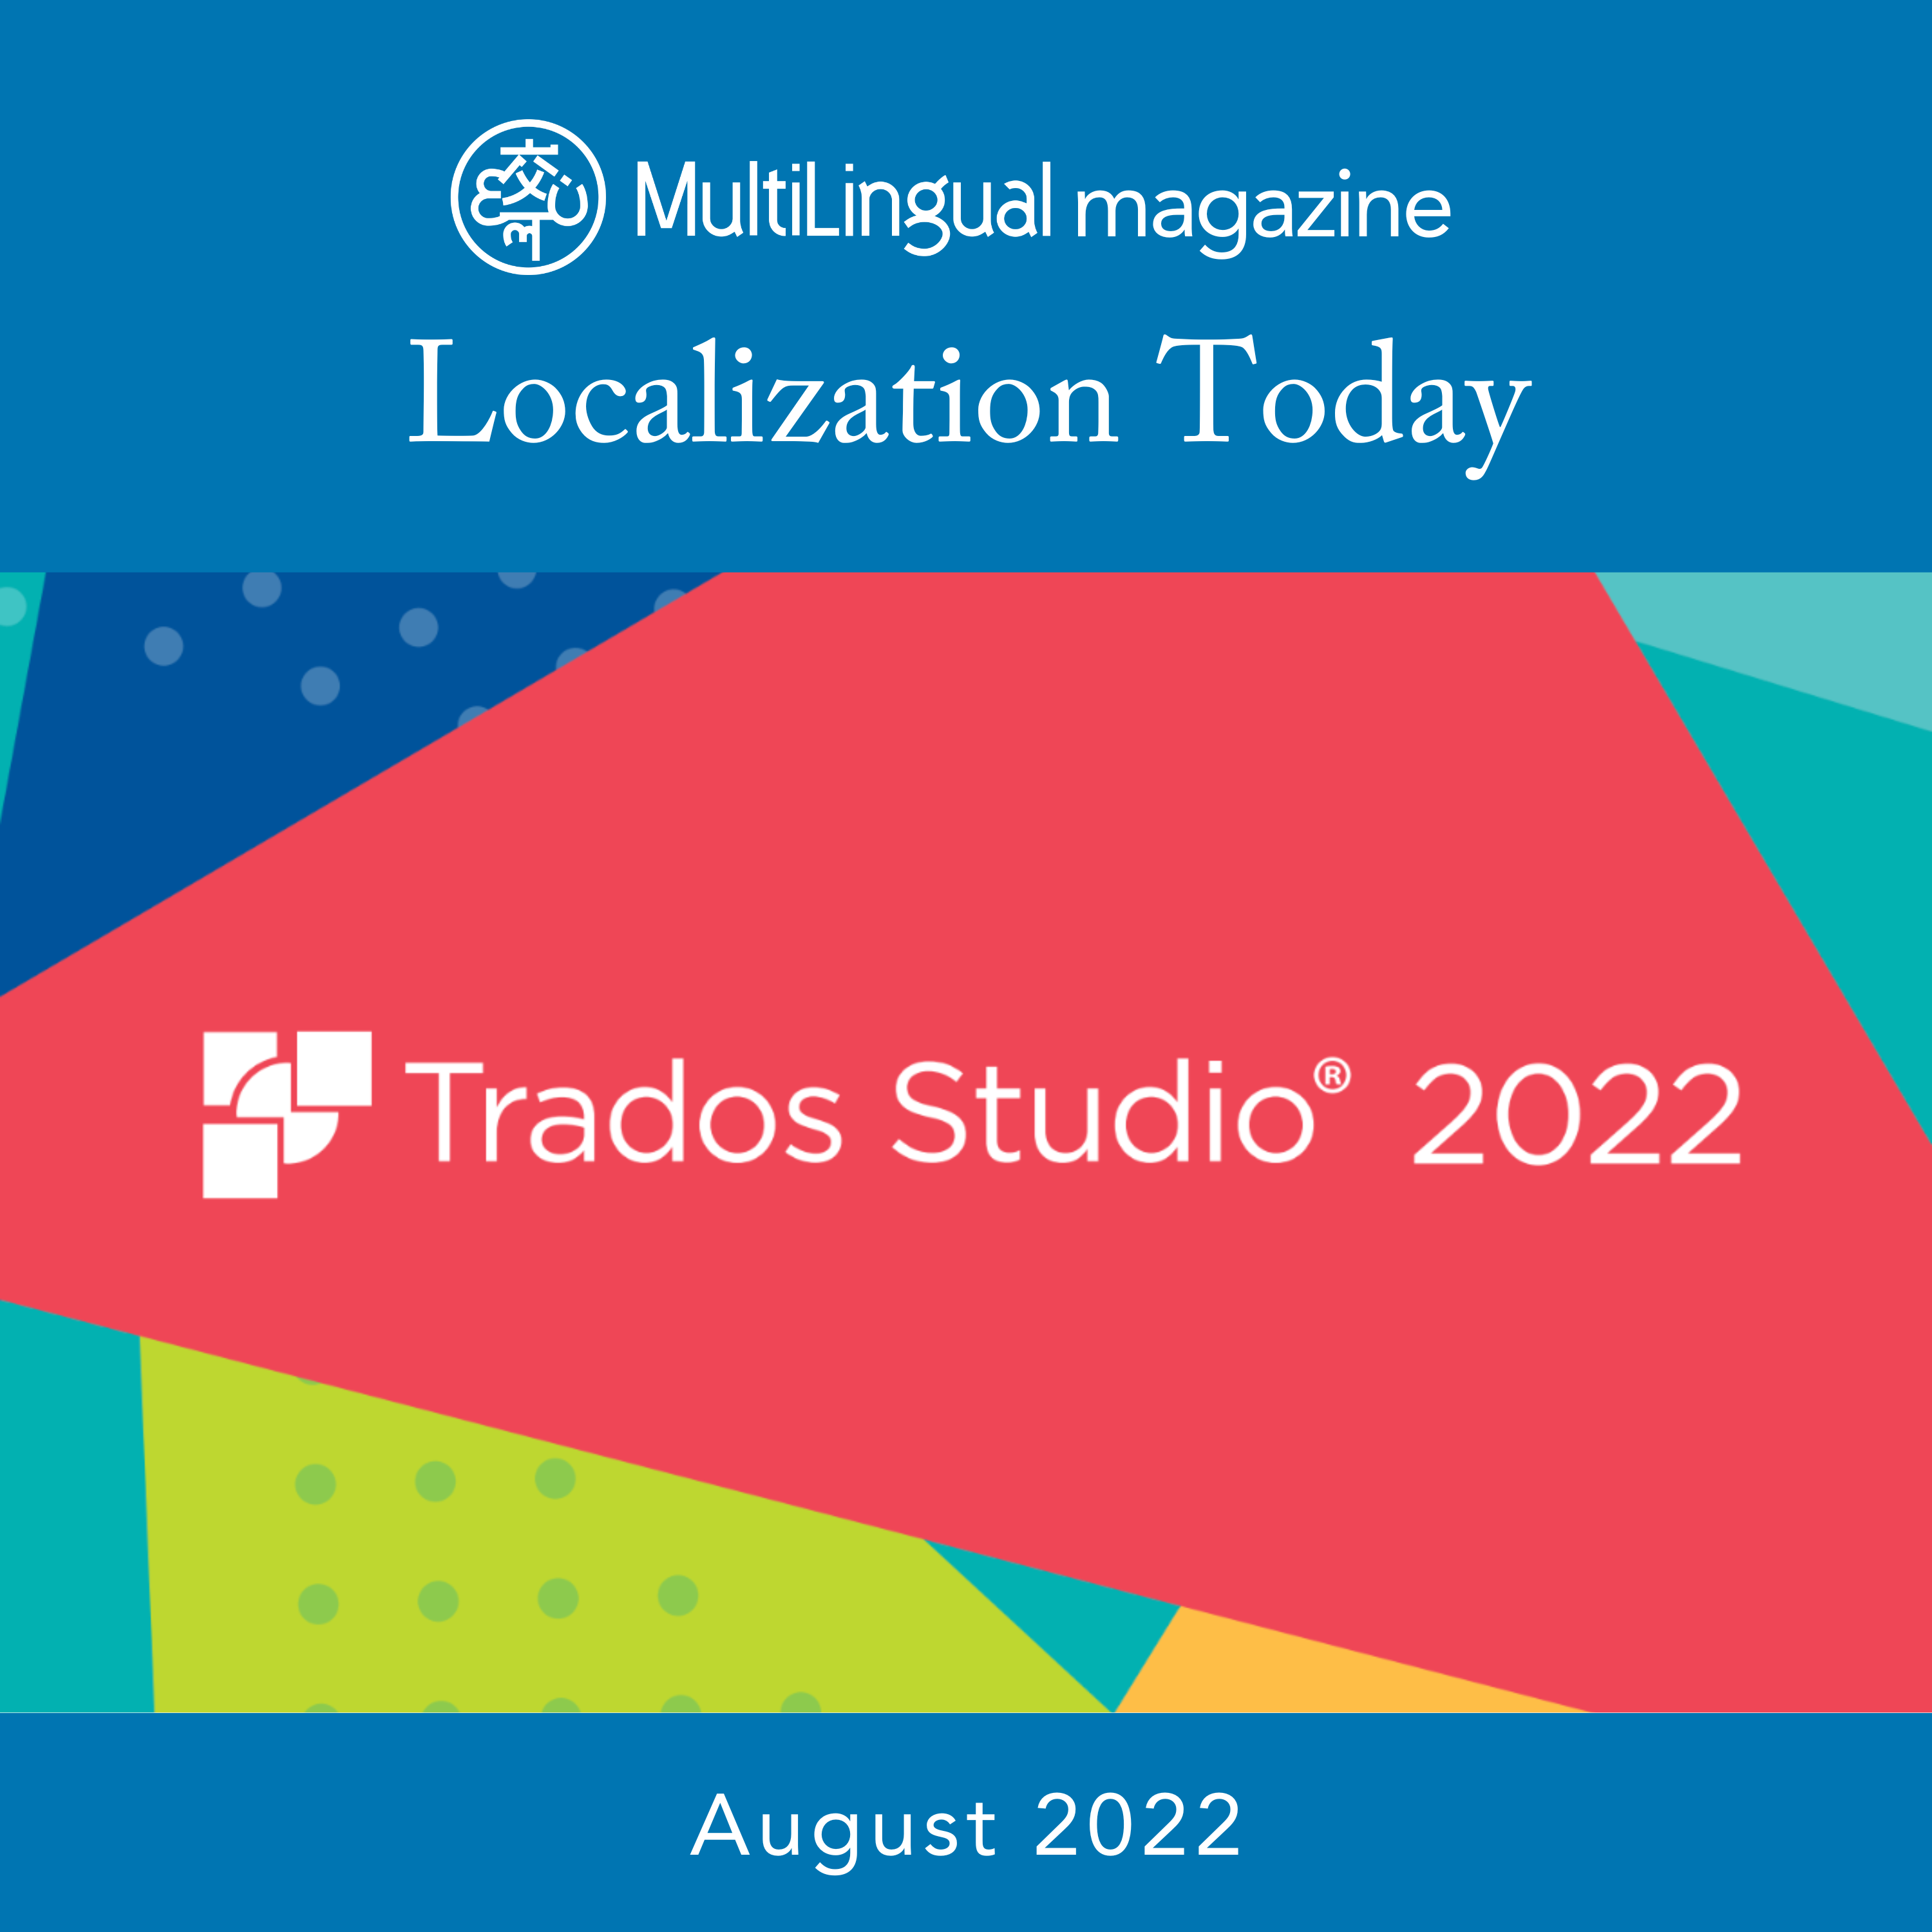 Trados Studio 2022 | An Accelerated Journey to The Cloud